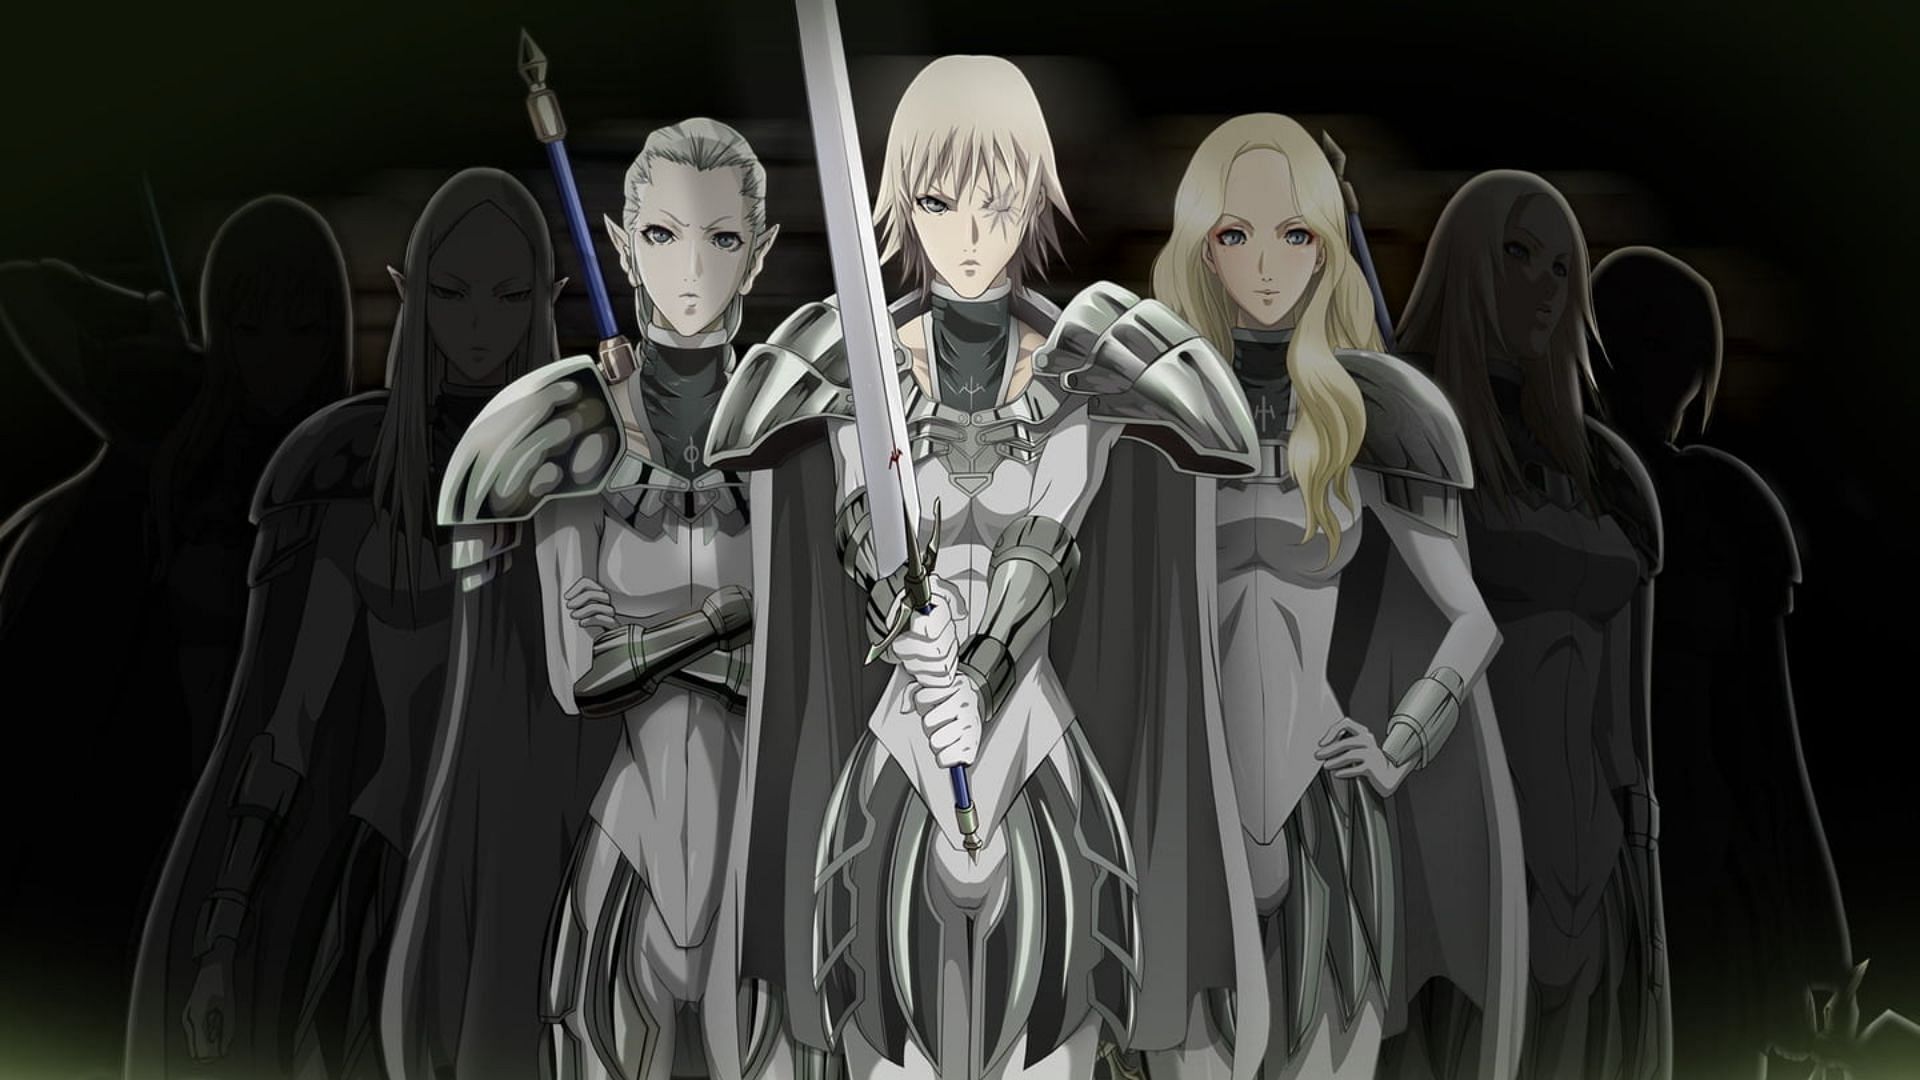 Claymore anime cover (Image via Madhouse)